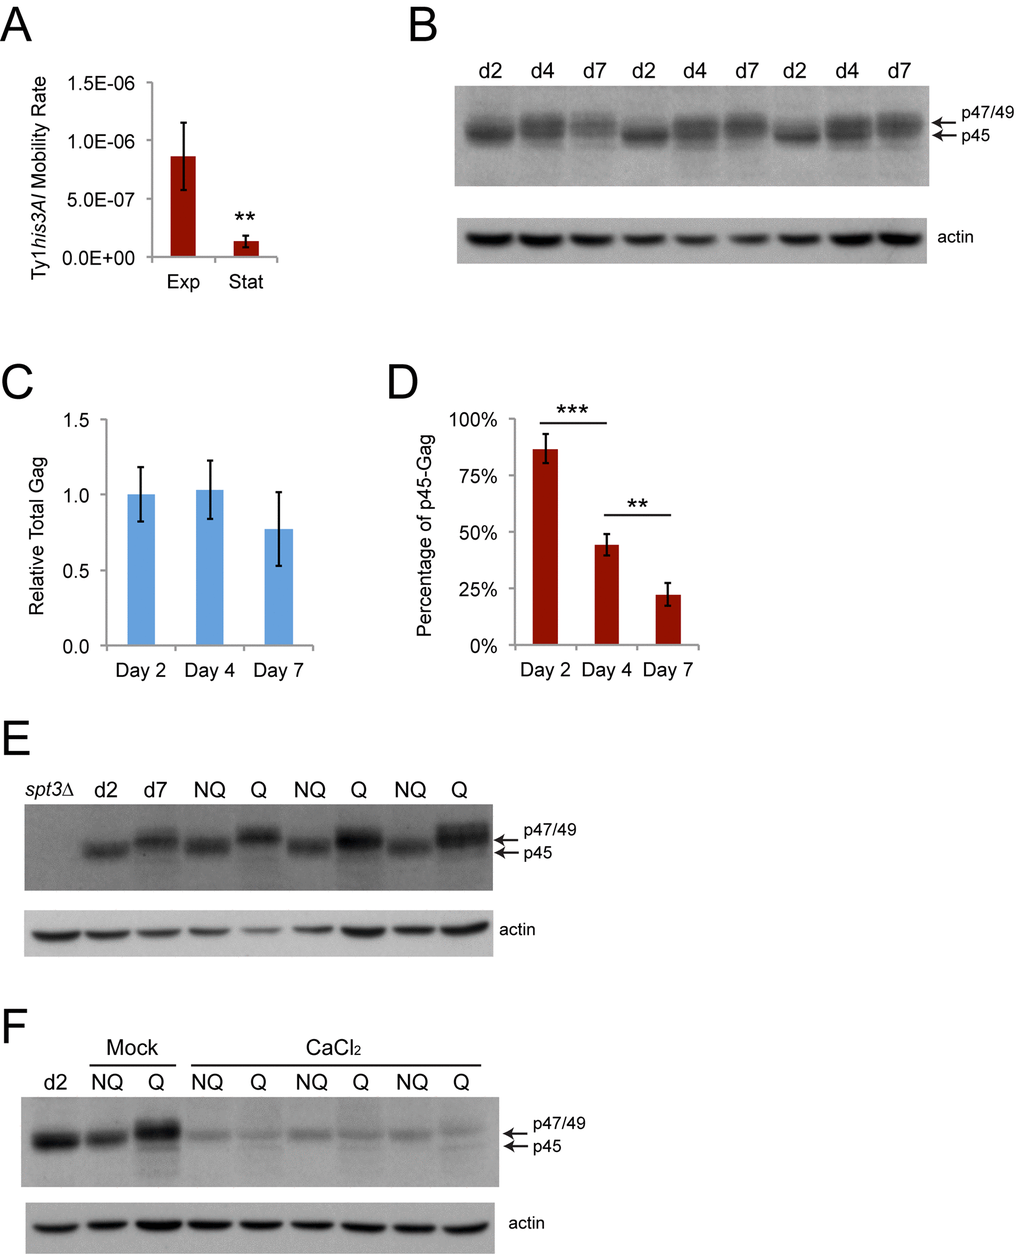 Ty1 retromobility and the proportion of mature p45-Gag decrease as cells transition to stationary phase. (A) His+ rates per cell generation for cells grown to mid-exponential (Exp, two days) or early stationary phase (Stat, four days). Data are for five trials. (B) Western blot probed with Gag antibody (upper panel) or reprobed with beta-actin antibody as a loading control (lower panel) for protein extracts prepared from cells grown for two days to exponential phase (d2), four days to early stationary phase (d4), or seven days to stationary phase (d7). Arrows indicate the migration of the different forms of Gag. (C) Quantification of Gag levels normalized to beta-actin in cells grown for the indicated number of days. Data are for three trials. (D) Quantification of the proportion of the total Gag signal that was comprised of p45 for cells grown for the indicated number of days for three trials. Data are from three trials. Horizontal bars indicate comparisons between days two and four or days four and seven. (E-F) Western blots for Gag and beta-actin as described for panel B for cell extracts prepared from exponential phase cells (d2, spt3∆), stationary phase cells (d7), or fractionated NQ and Q cells grown in YPD without (panel E and panel F Mock) or with (CaCl2) 100 mM calcium chloride. Graphs show mean values with standard deviation. Asterisks indicate significant differences as for Fig. 2.